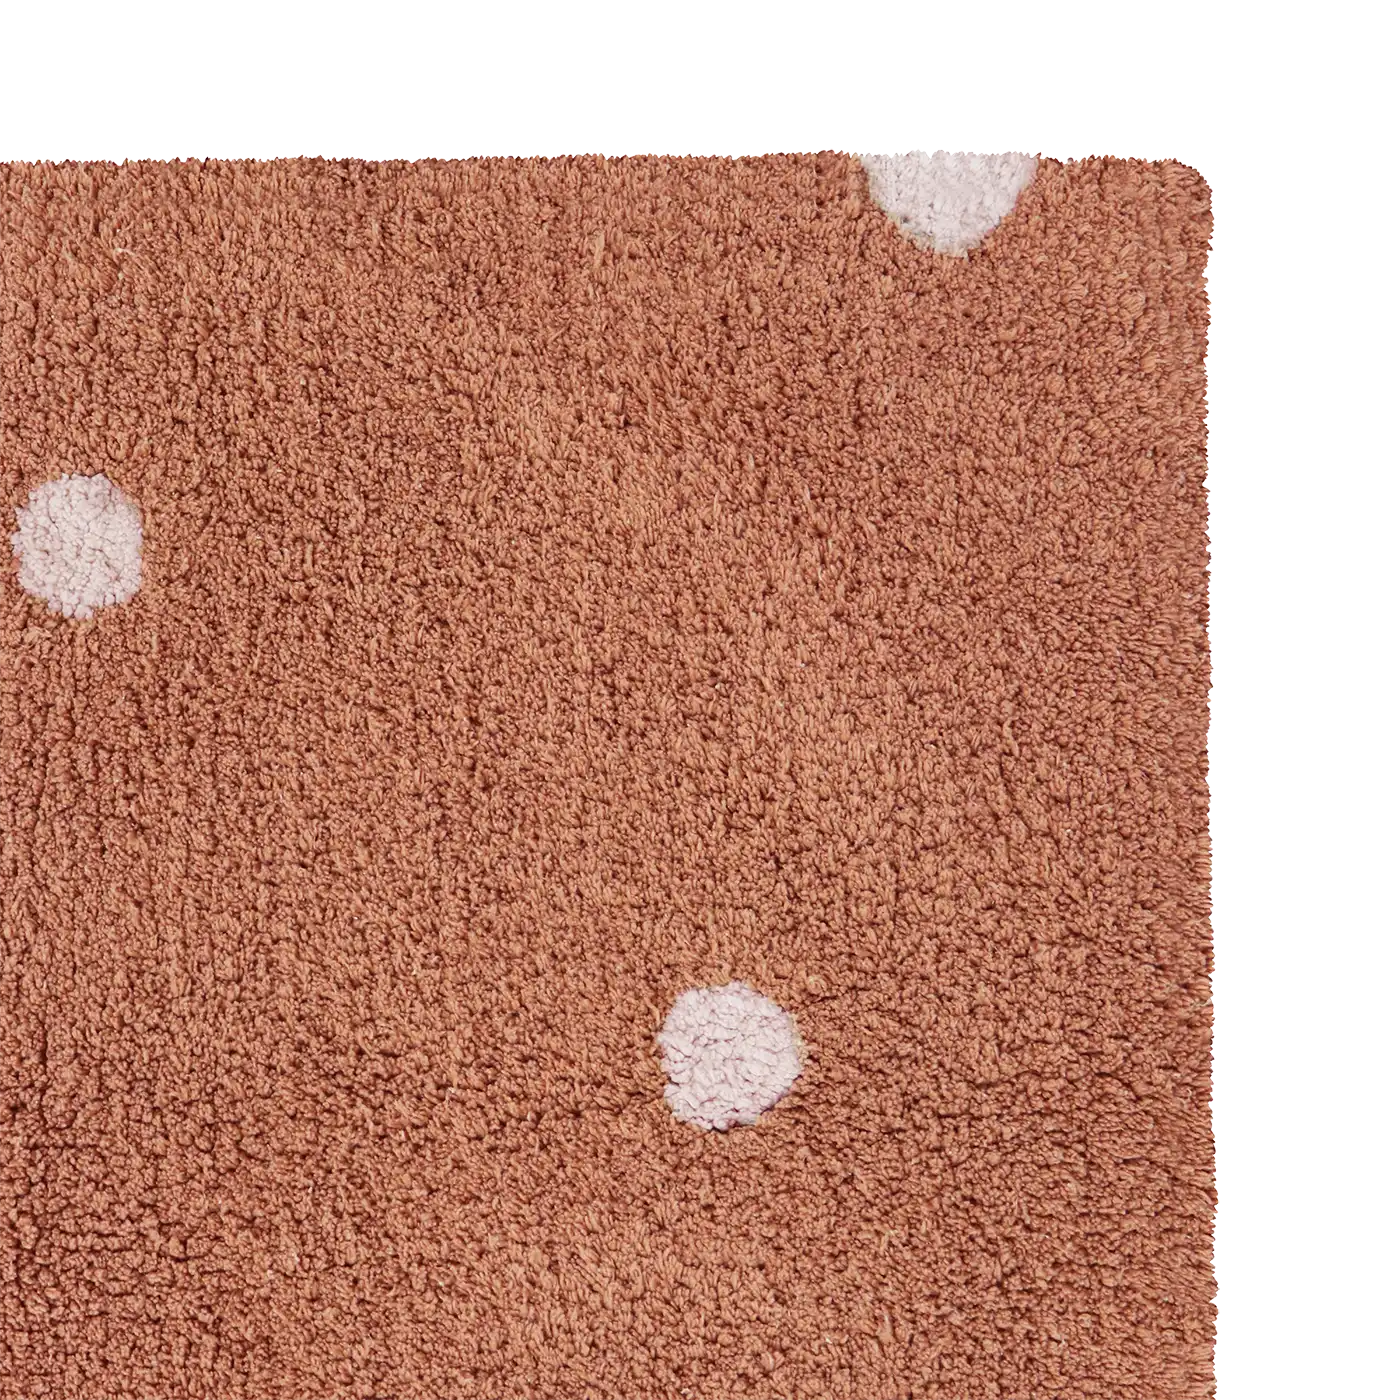 Lorena Canals Mini Dot Washable Rug - Chestnut (Mushroom hunters / Forest finds Collection)